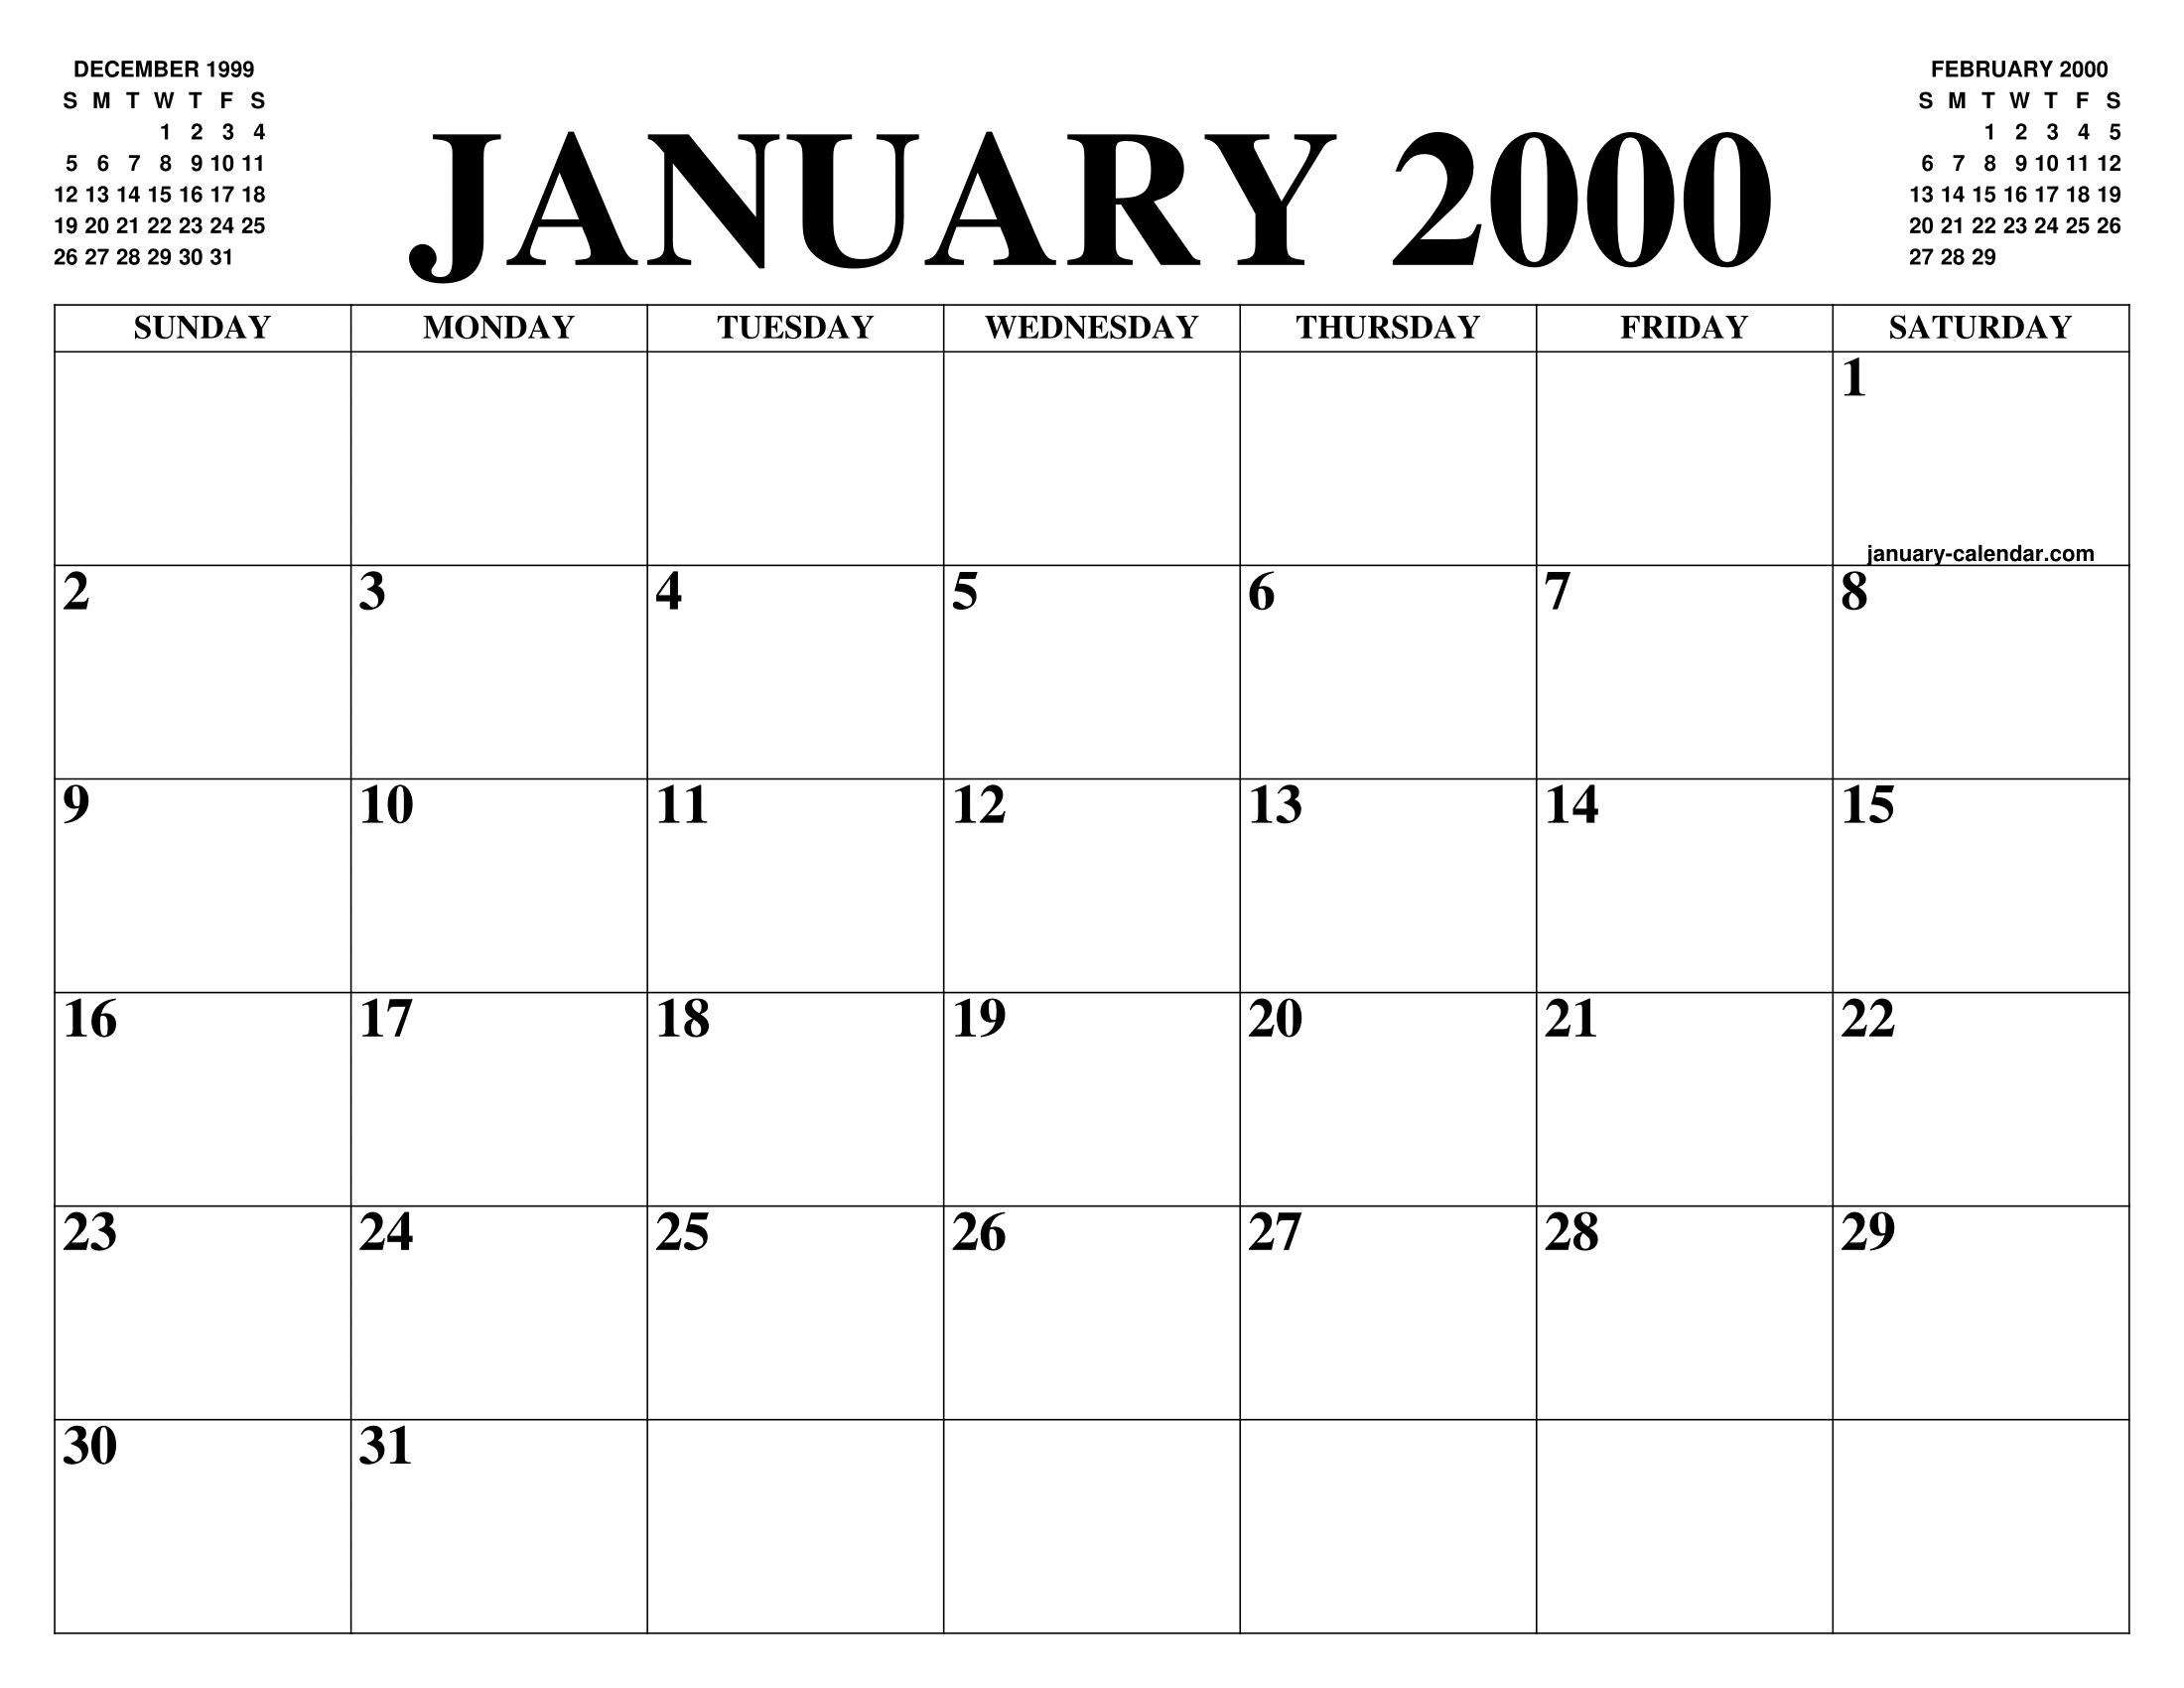 January 2000 Calendar Of The Month Free Printable January Calendar Of The Year Agenda